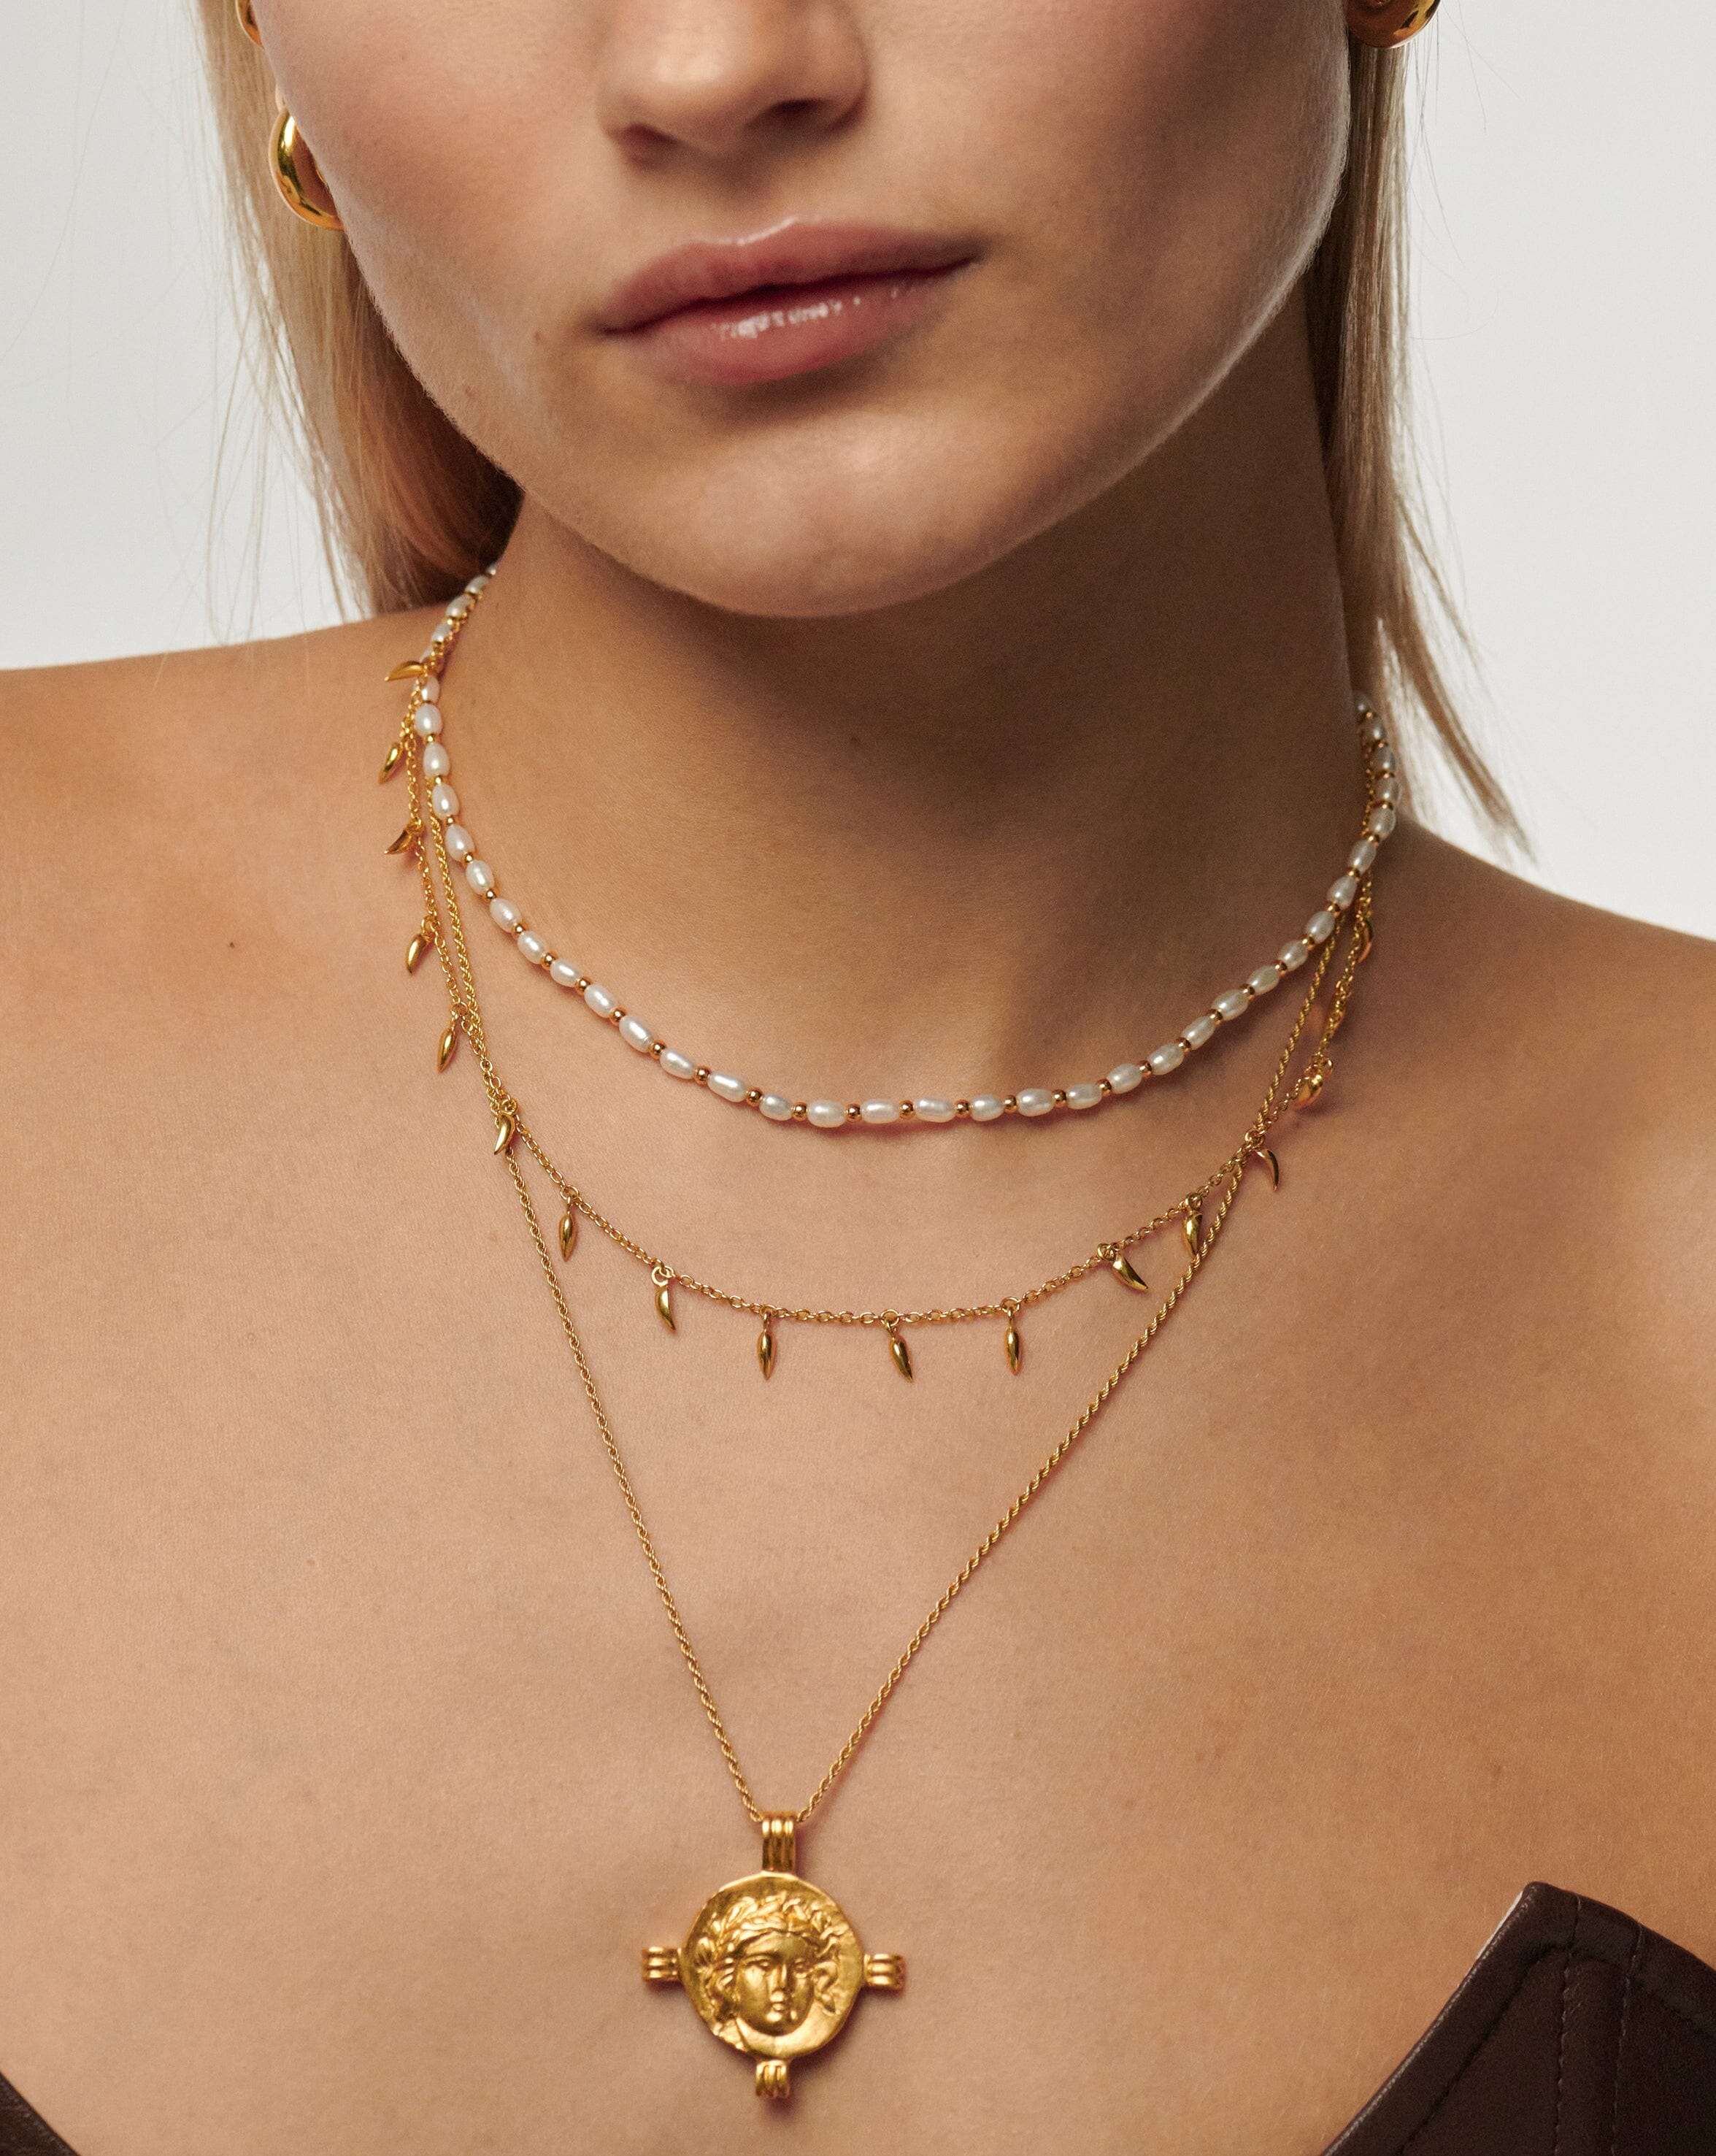 Lucy Williams Mini Fang Necklace | 18ct Gold Plated Vermeil Necklaces Missoma 